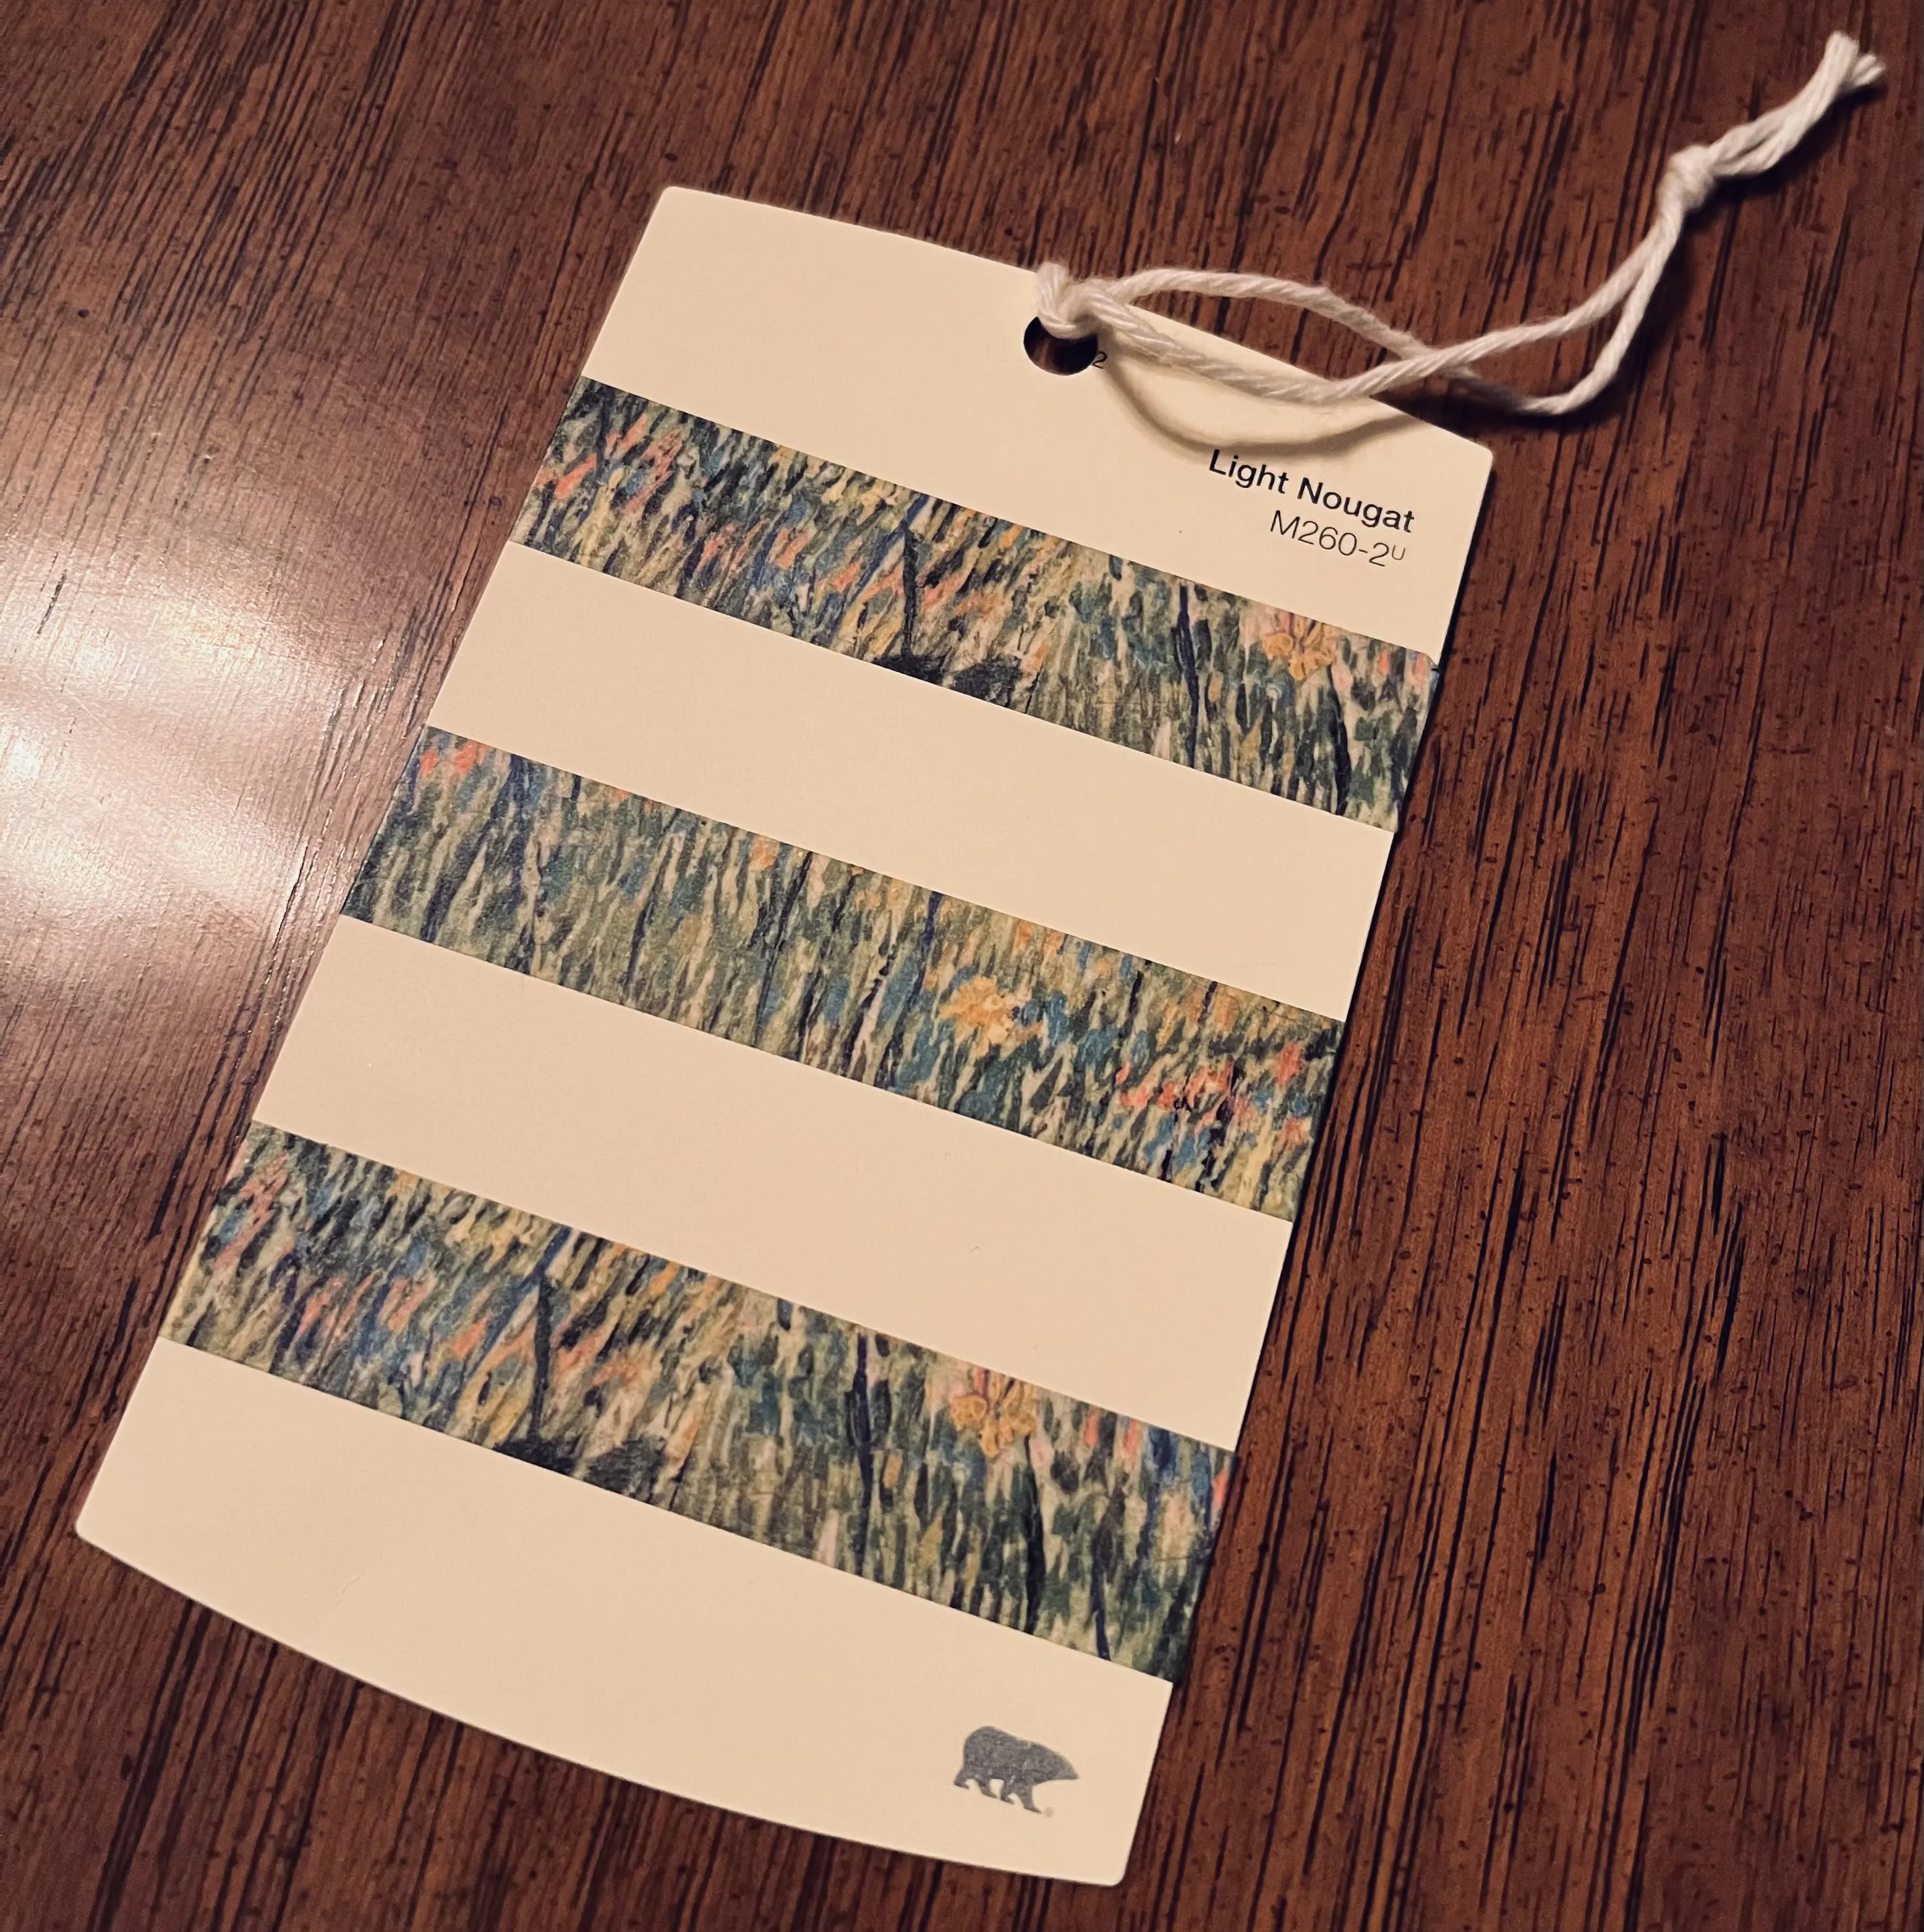 A creamy off-white paint color sample card reading 'Light Nougat // M260-2u'. Broad horizontal stripes on its surface are formed by washi tape printed with Van Gogh's "Patch of Grass" impressionist painting -- vibrant green, blue and pale pink upward brushstrokes with yellow flowers dotted throughout.